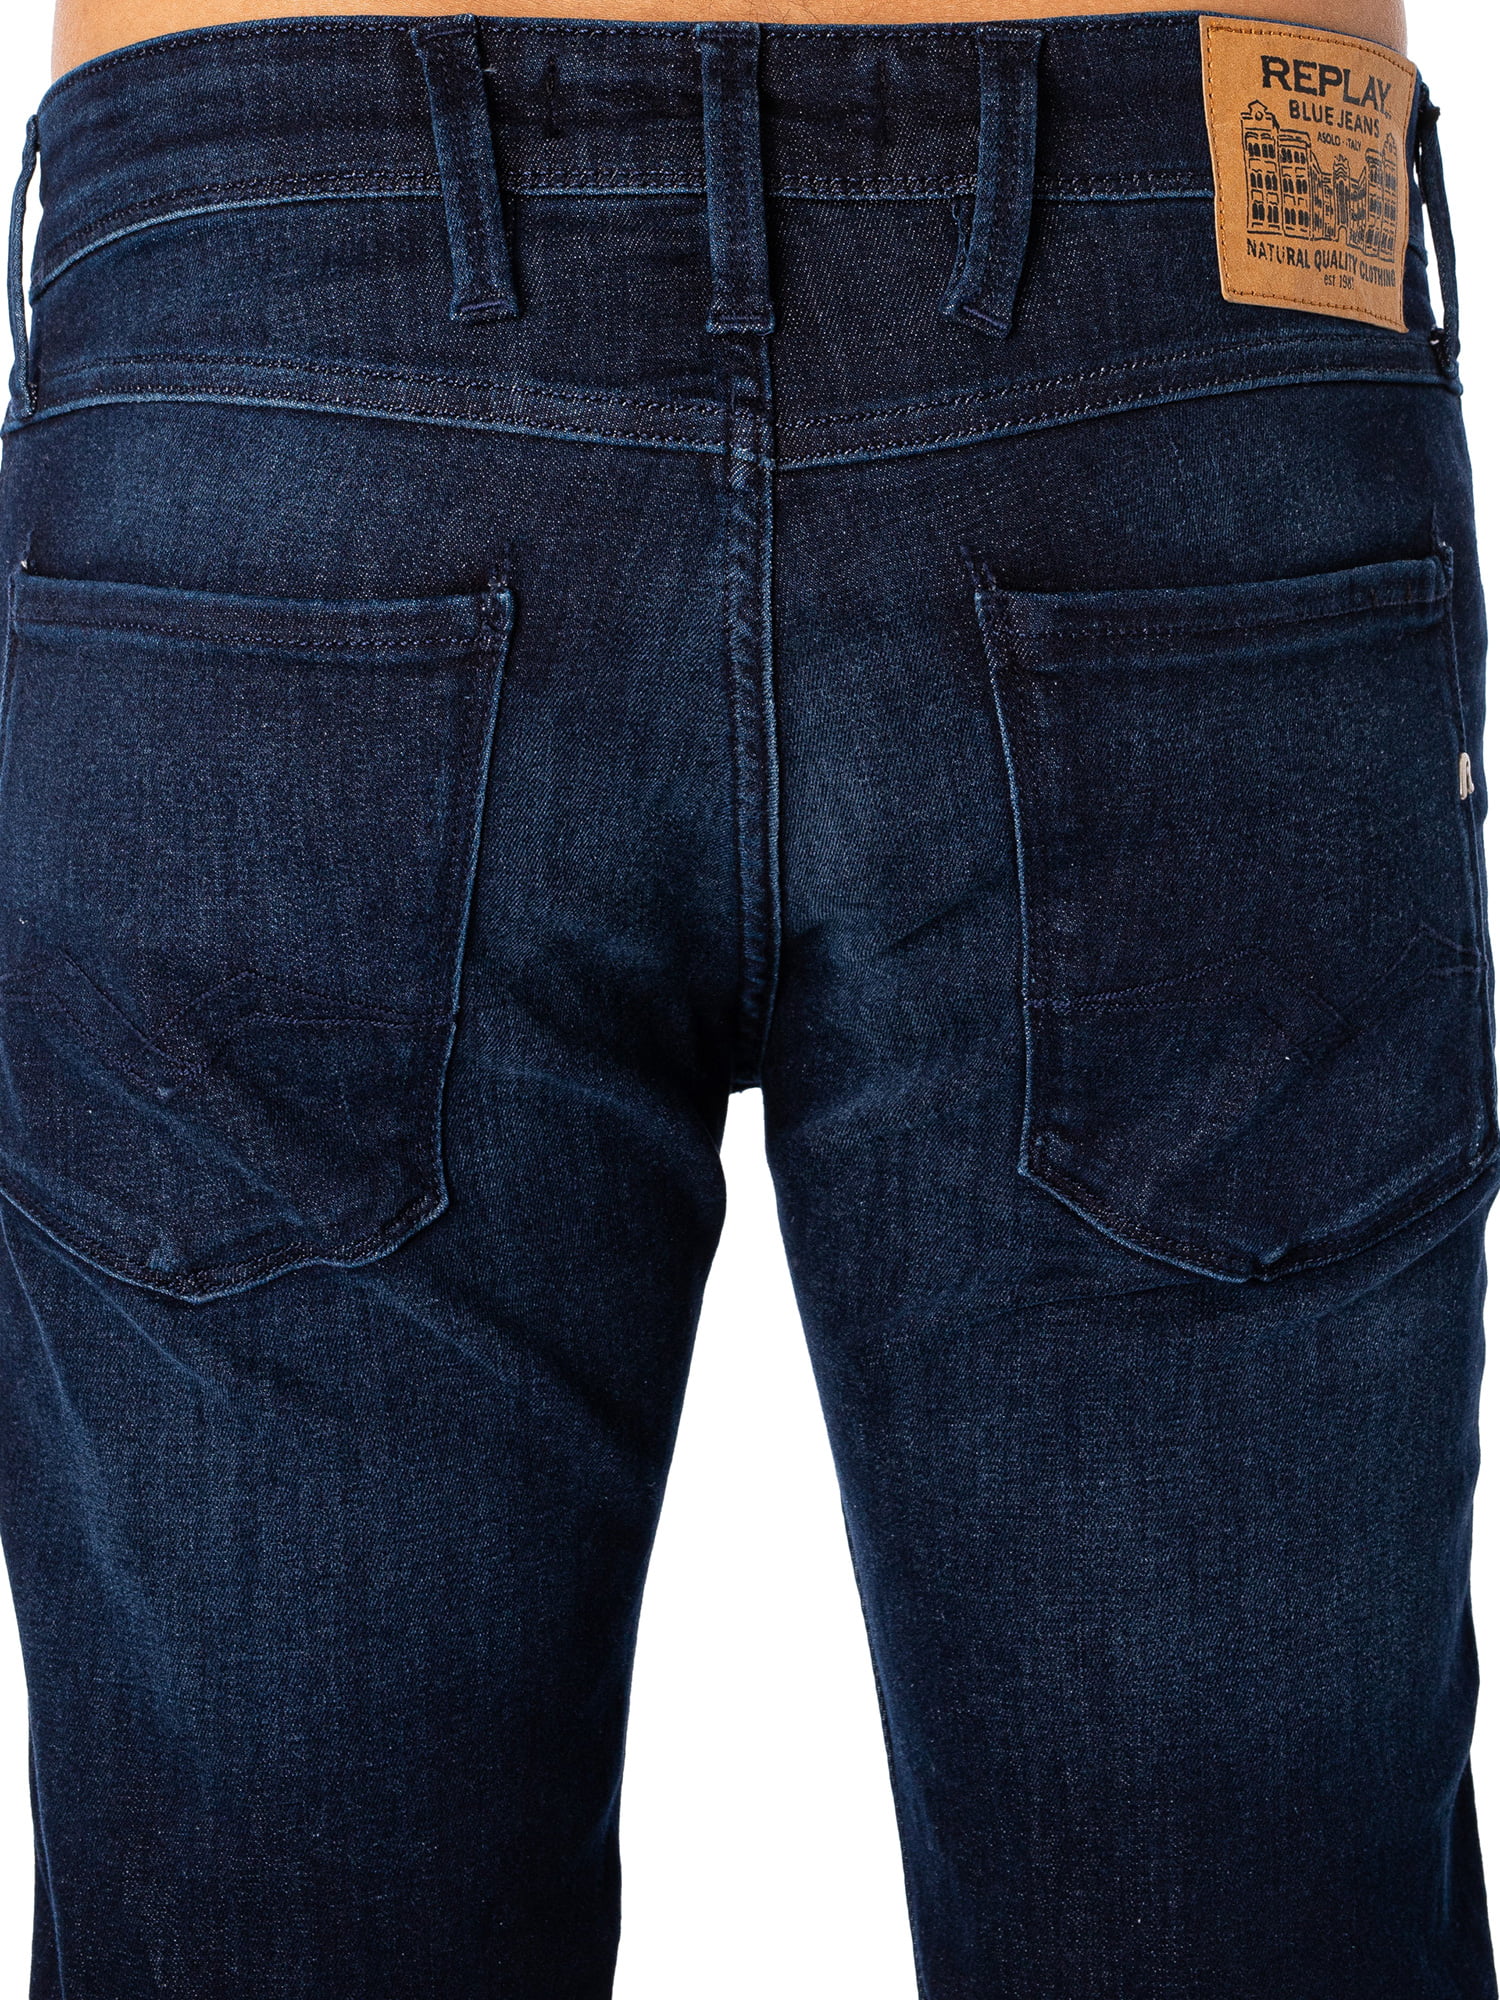 Anbass Blue Replay Slim Jeans,